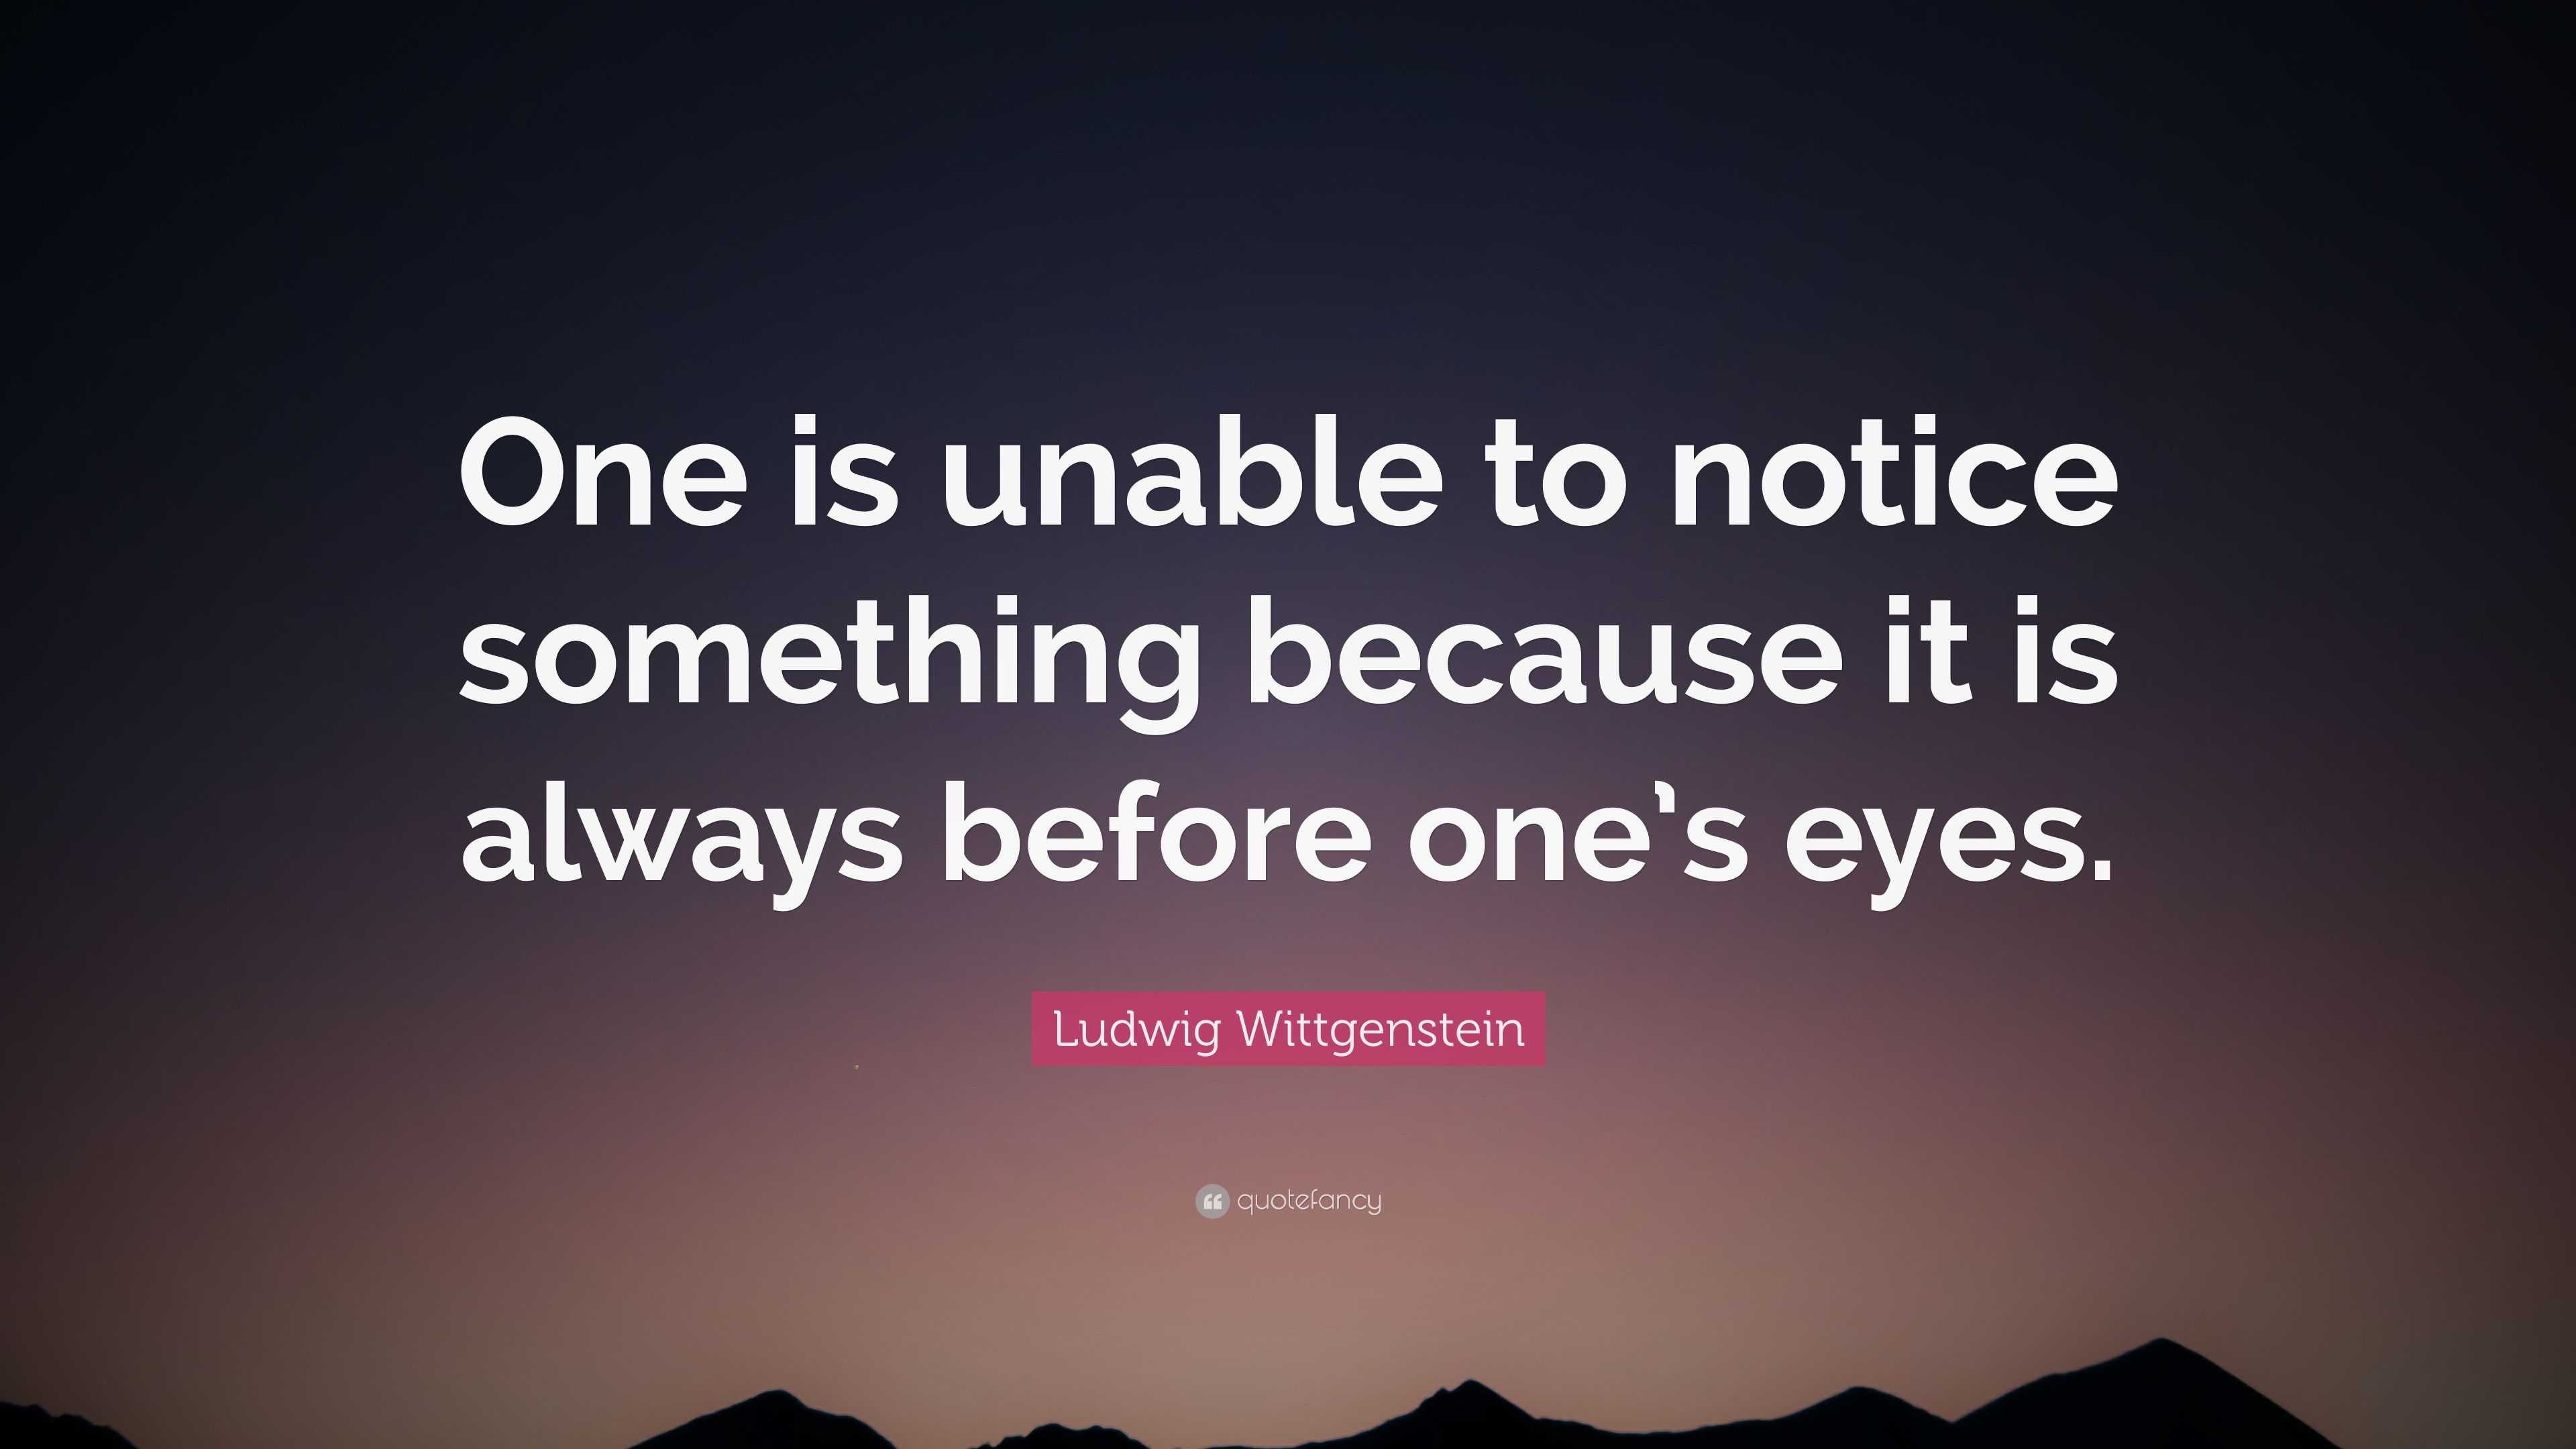 Ludwig Wittgenstein Quote: “One is unable to notice something because ...